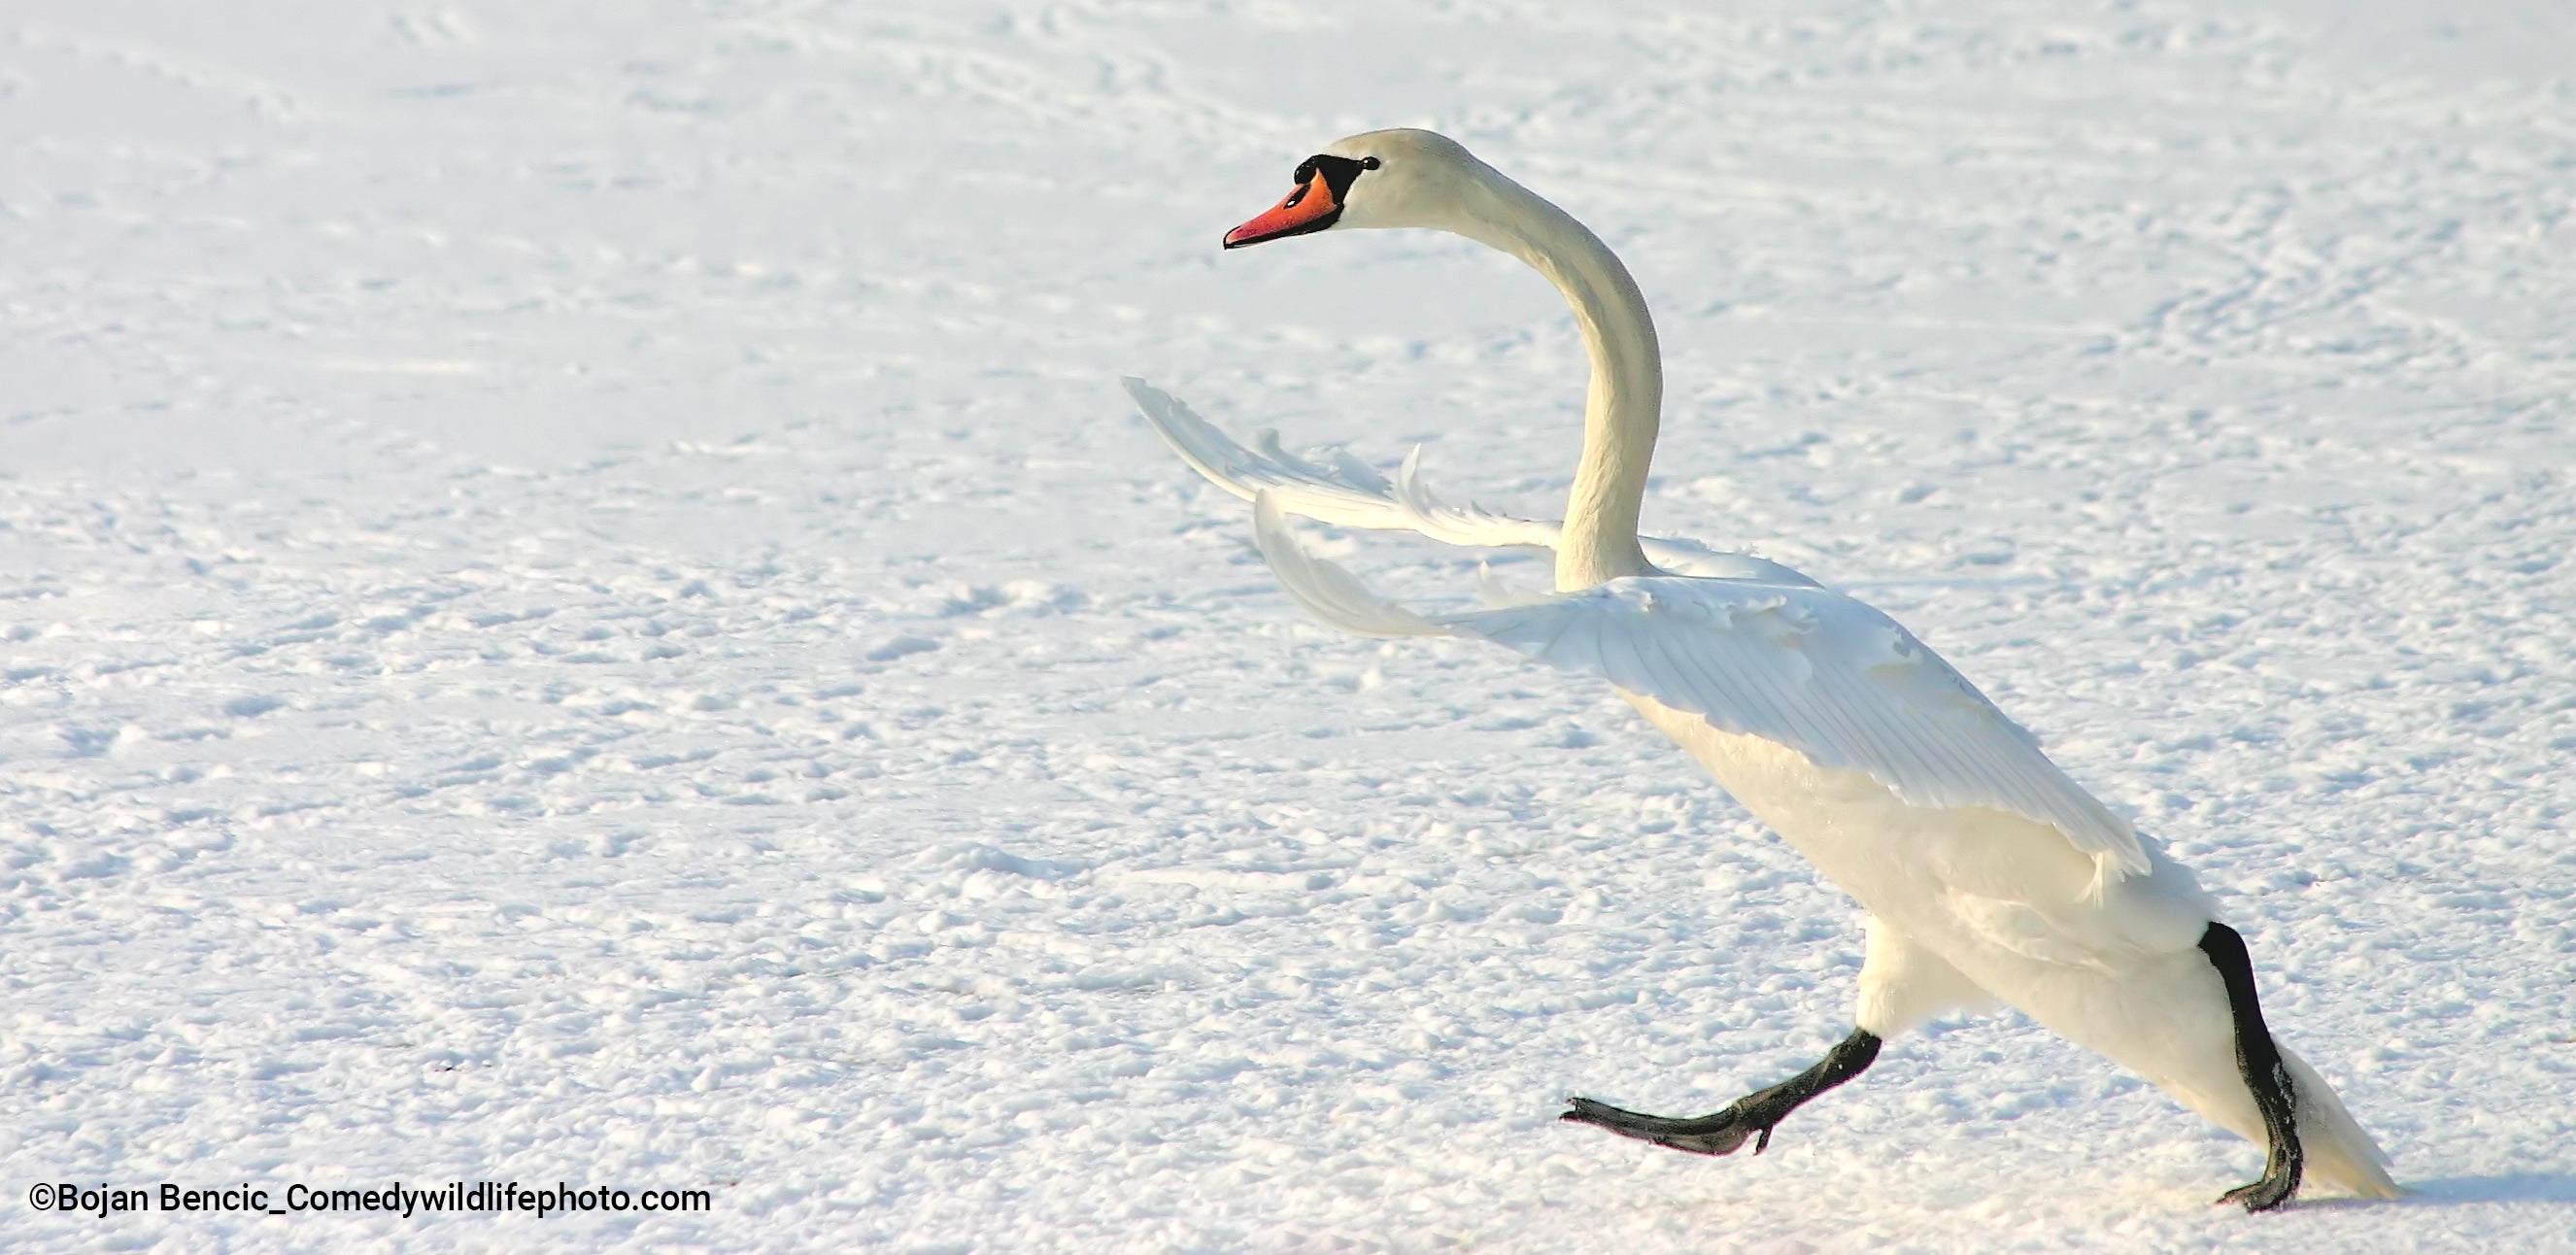 A mute swan chases another (out of frame). (Photo: © Bojan Bencic / Comedywildlifephoto.com.)